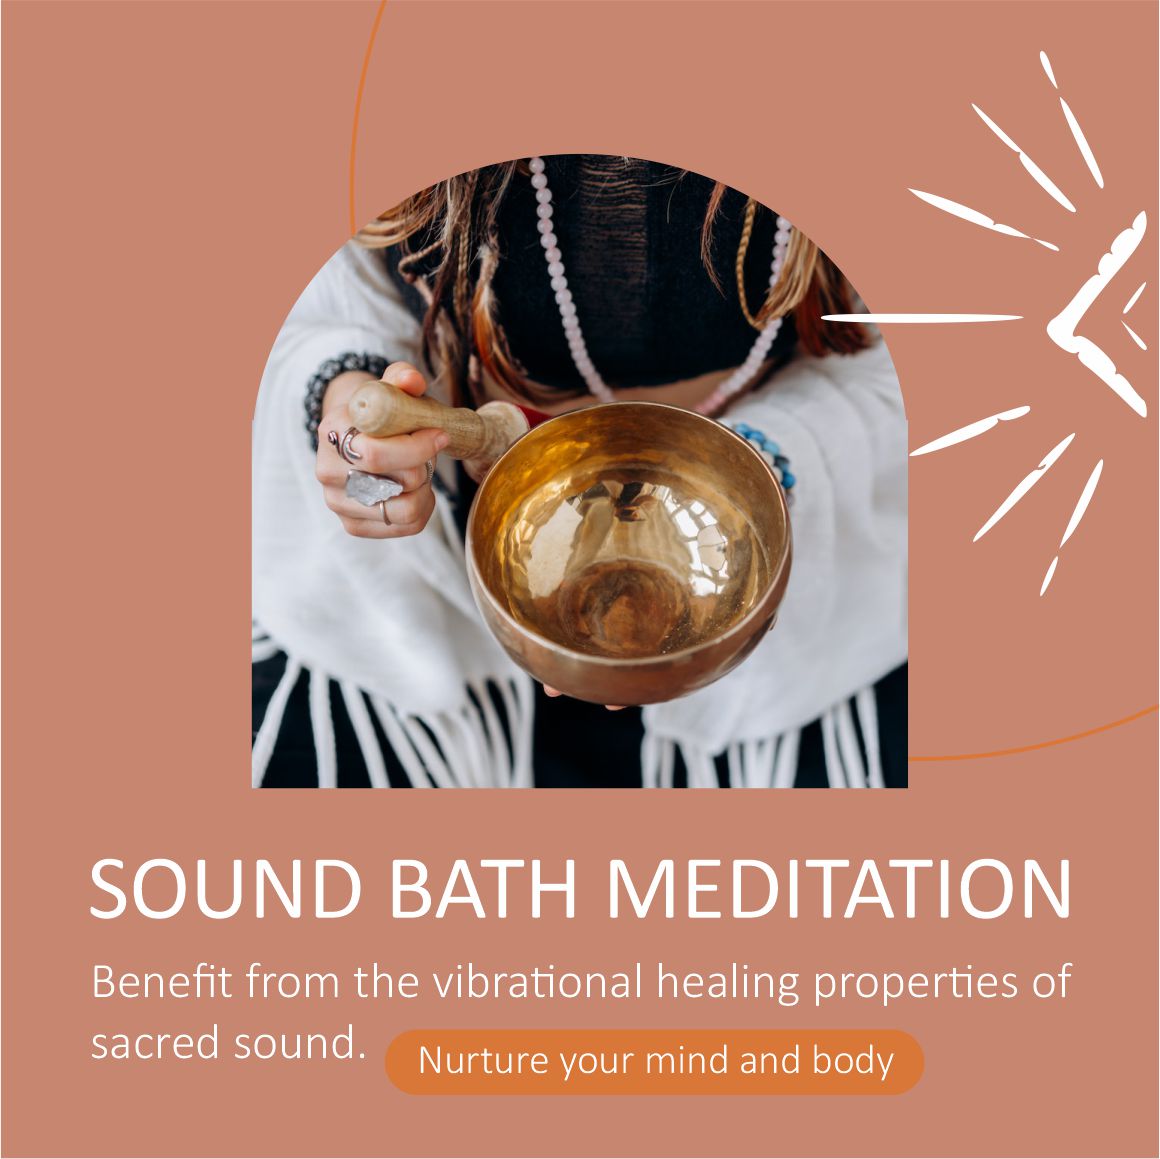 Sound Bath Meditation - With Trish - Every first Monday of the month